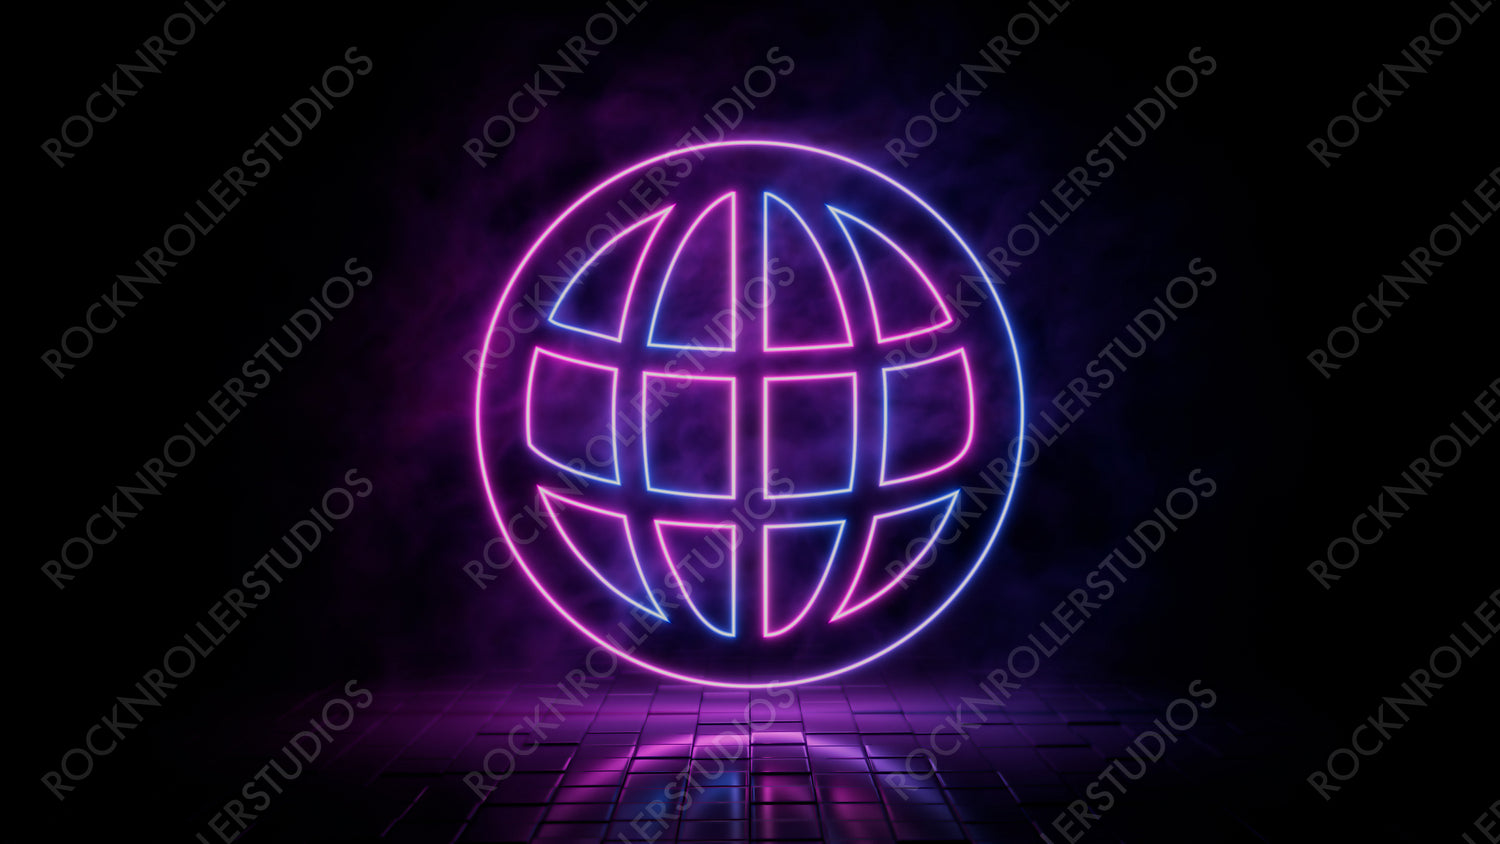 Pink and blue neon light web icon. Vibrant colored internet technology symbol, isolated on a black background. 3D Render